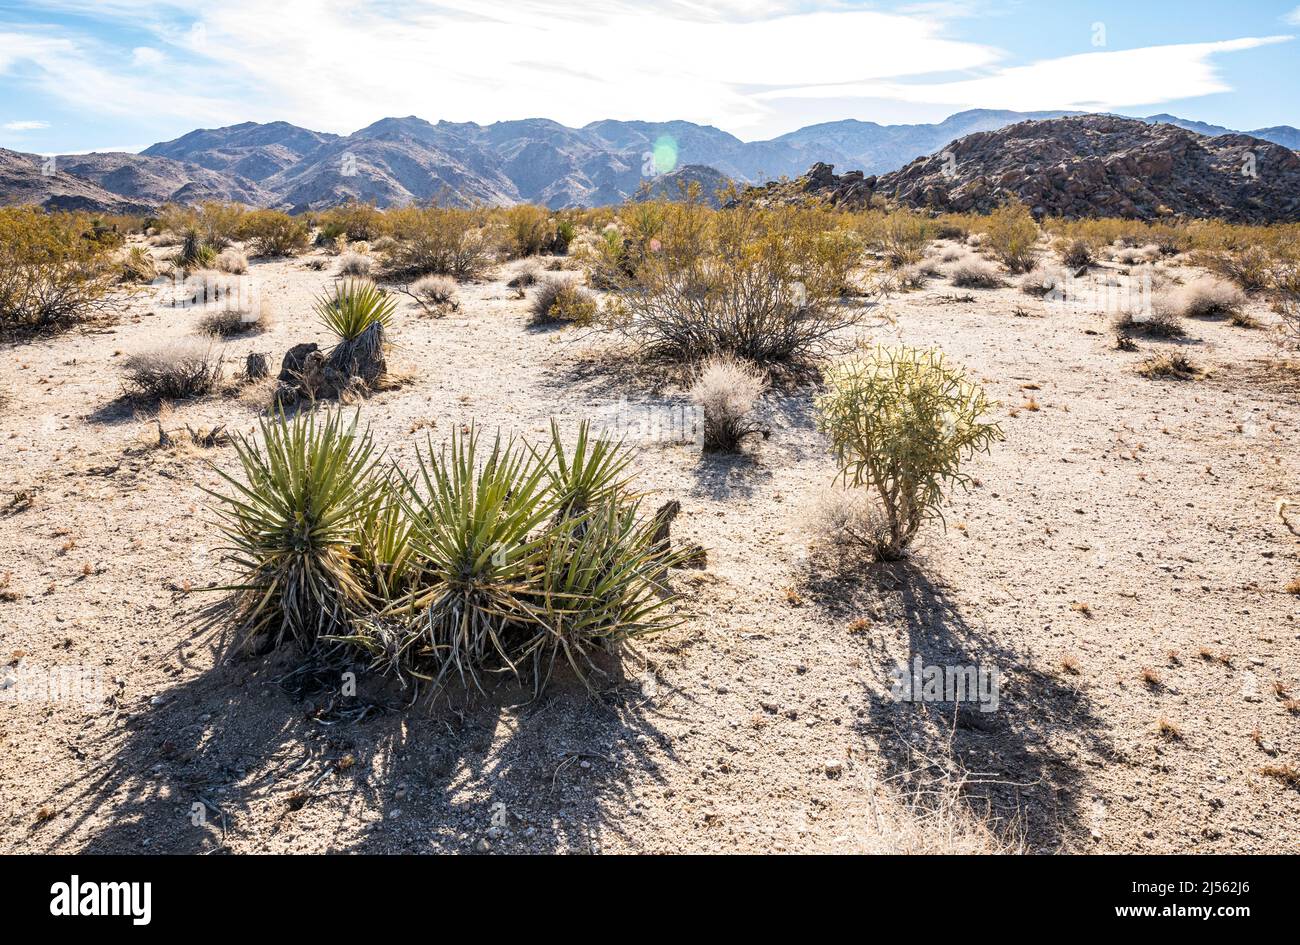 Mojave Yucca and other desert plants in Joshua Tree National Park near the Indian Cove entrance, California, USA Stock Photo